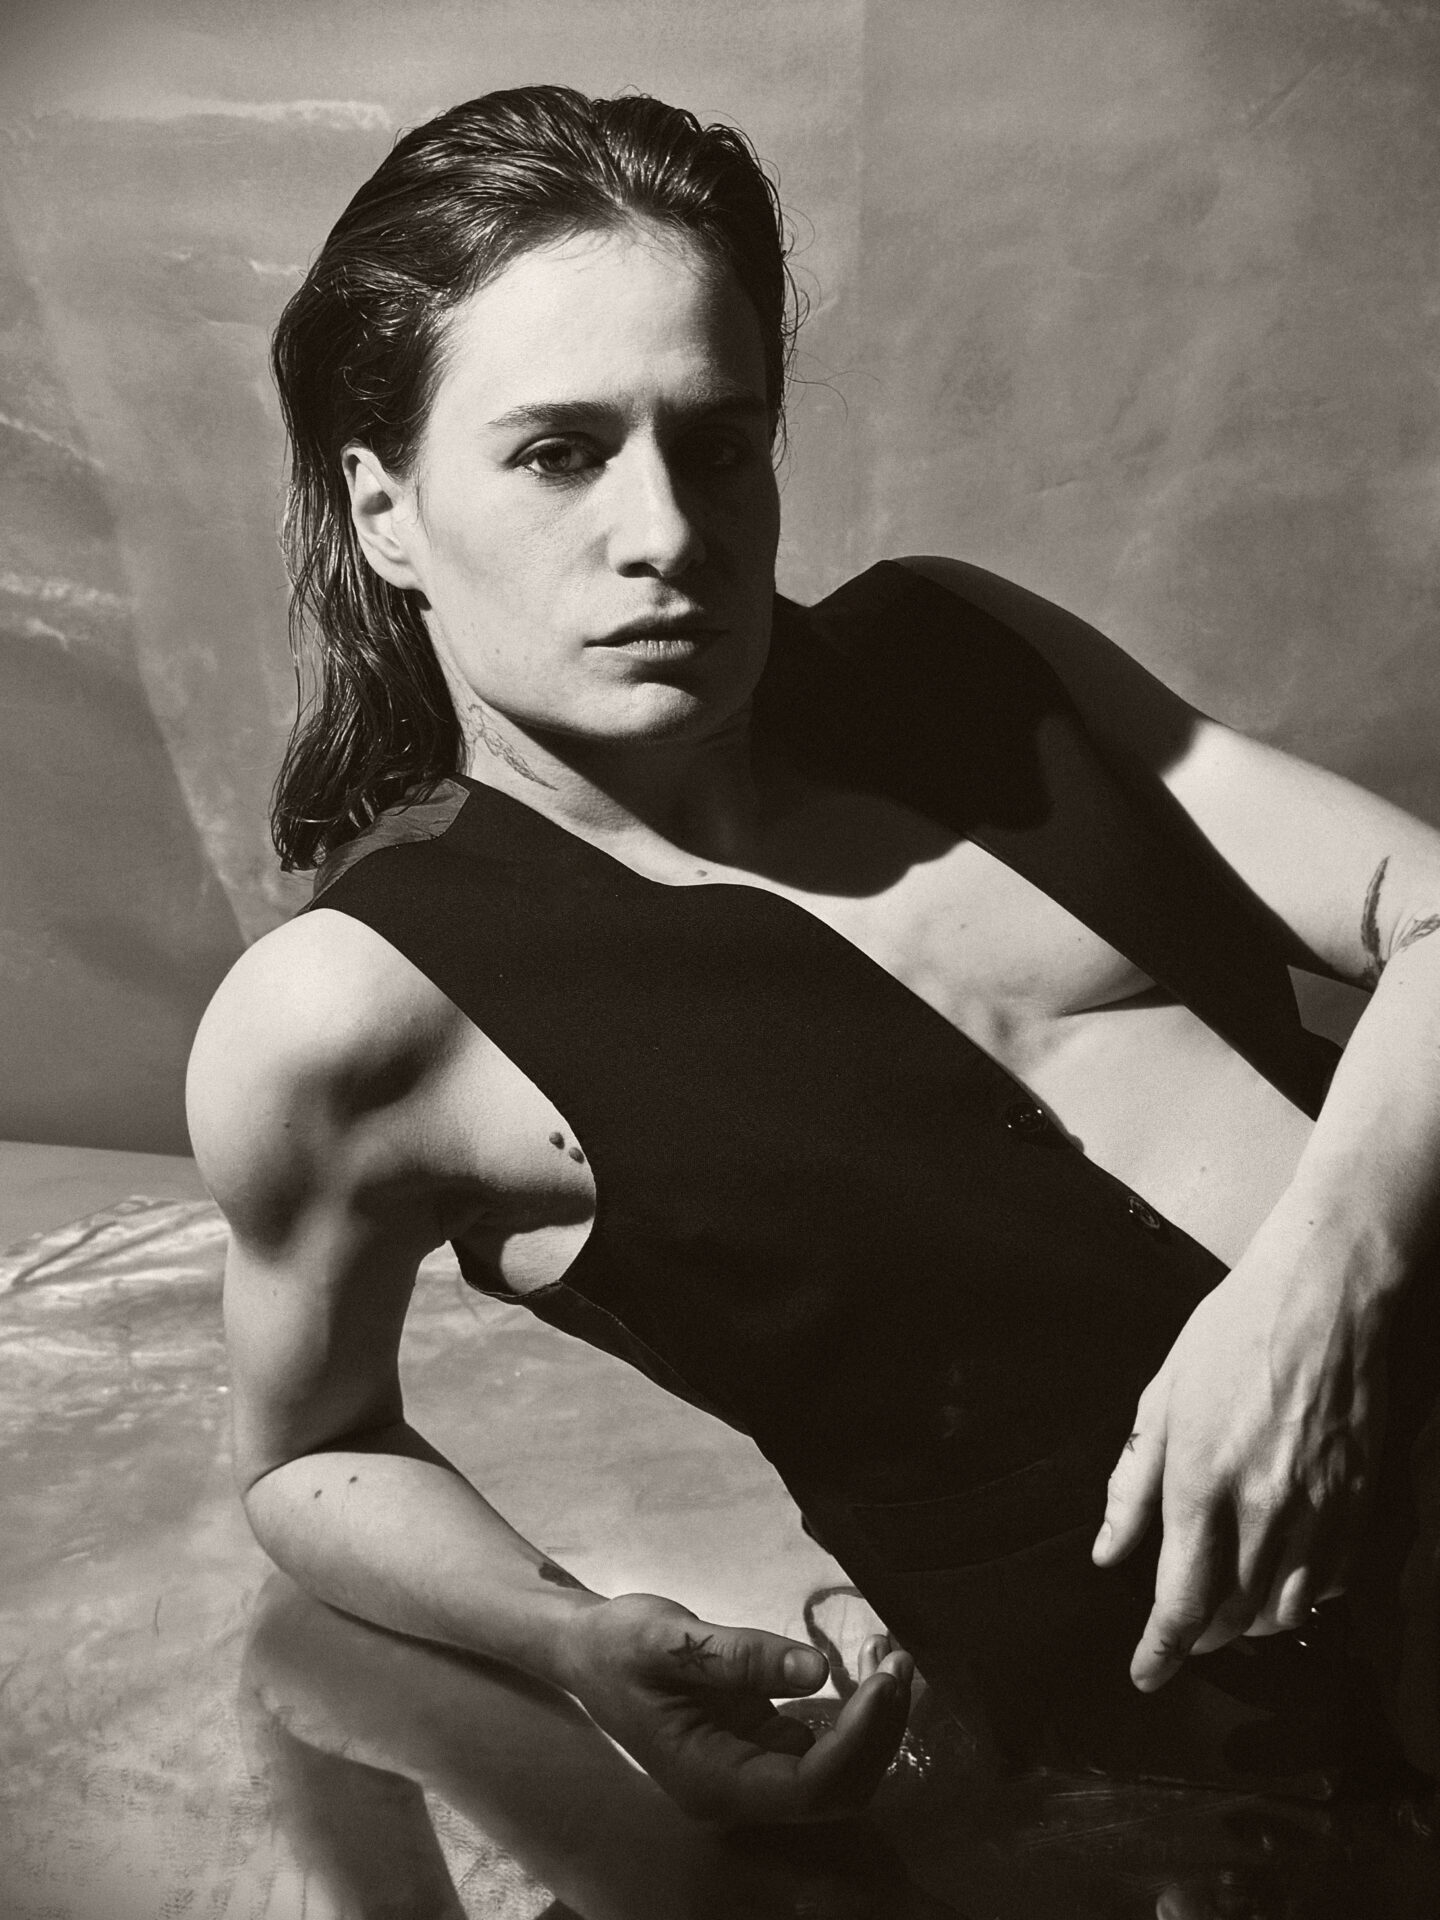 NEWS: Christine and the Queens announces new album 'PARANOÏA, ANGELS, TRUE LOVE' & new single 'To be honest' out now